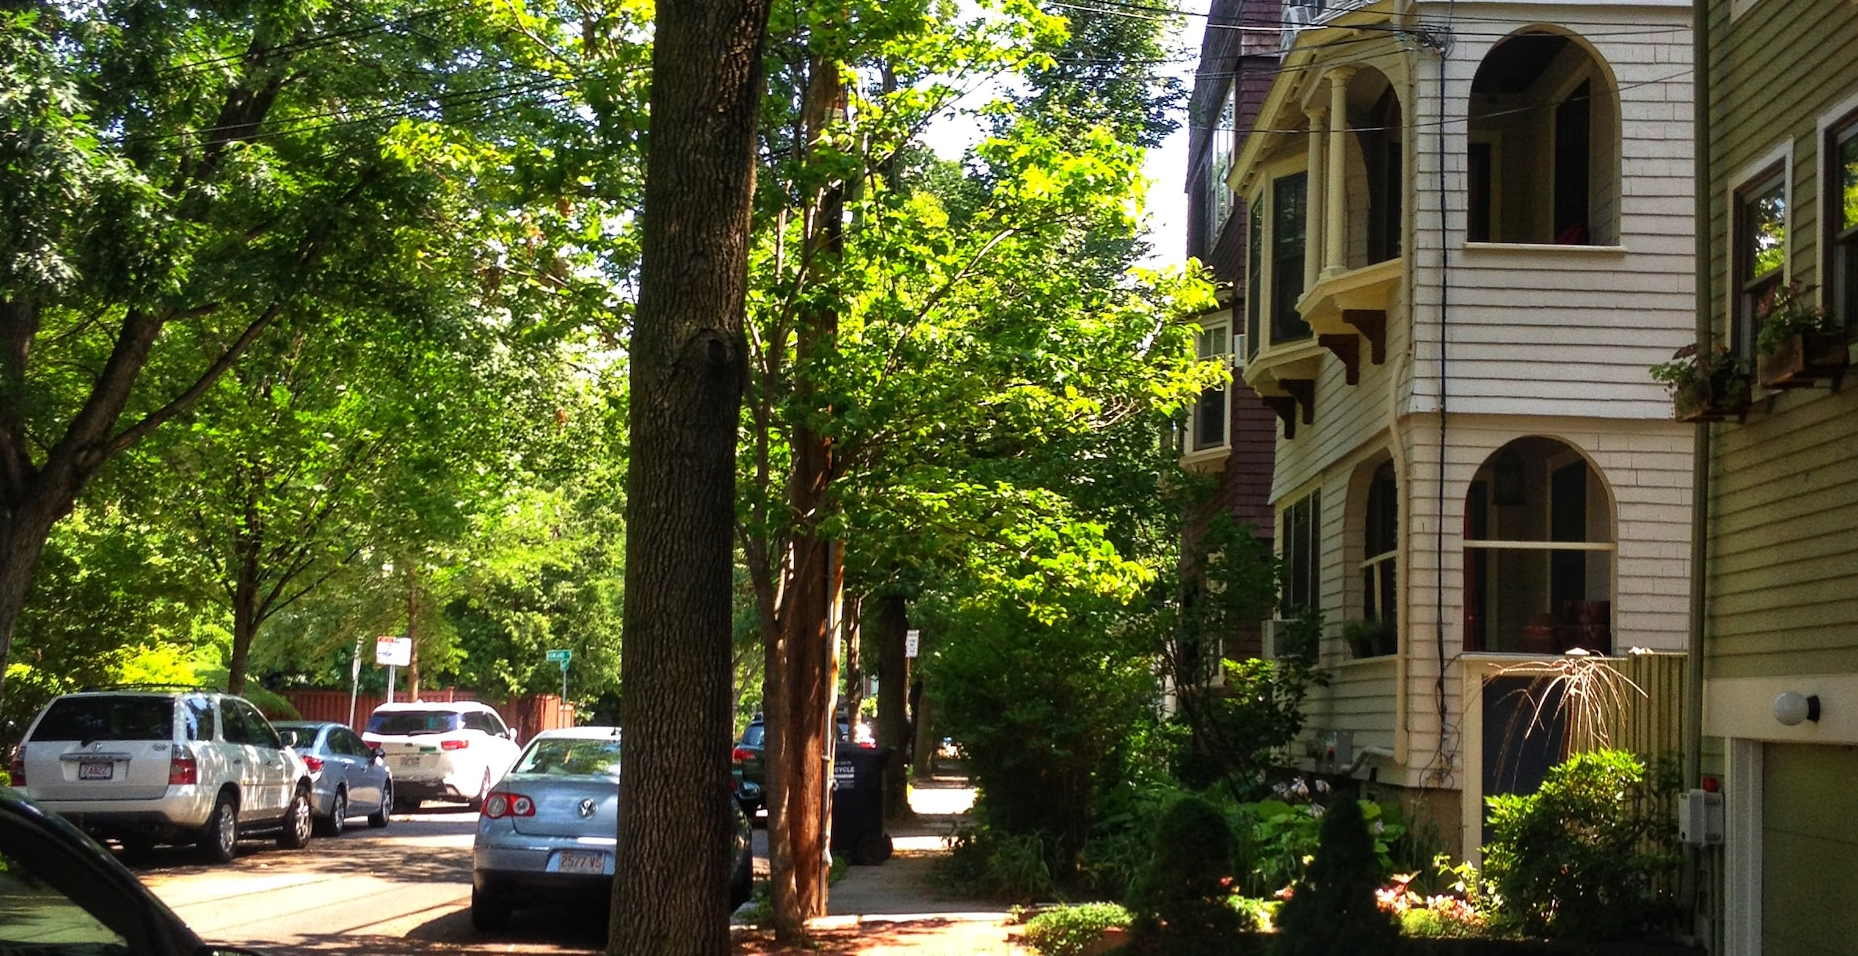 An image of a tree-lined street in Cambridge.